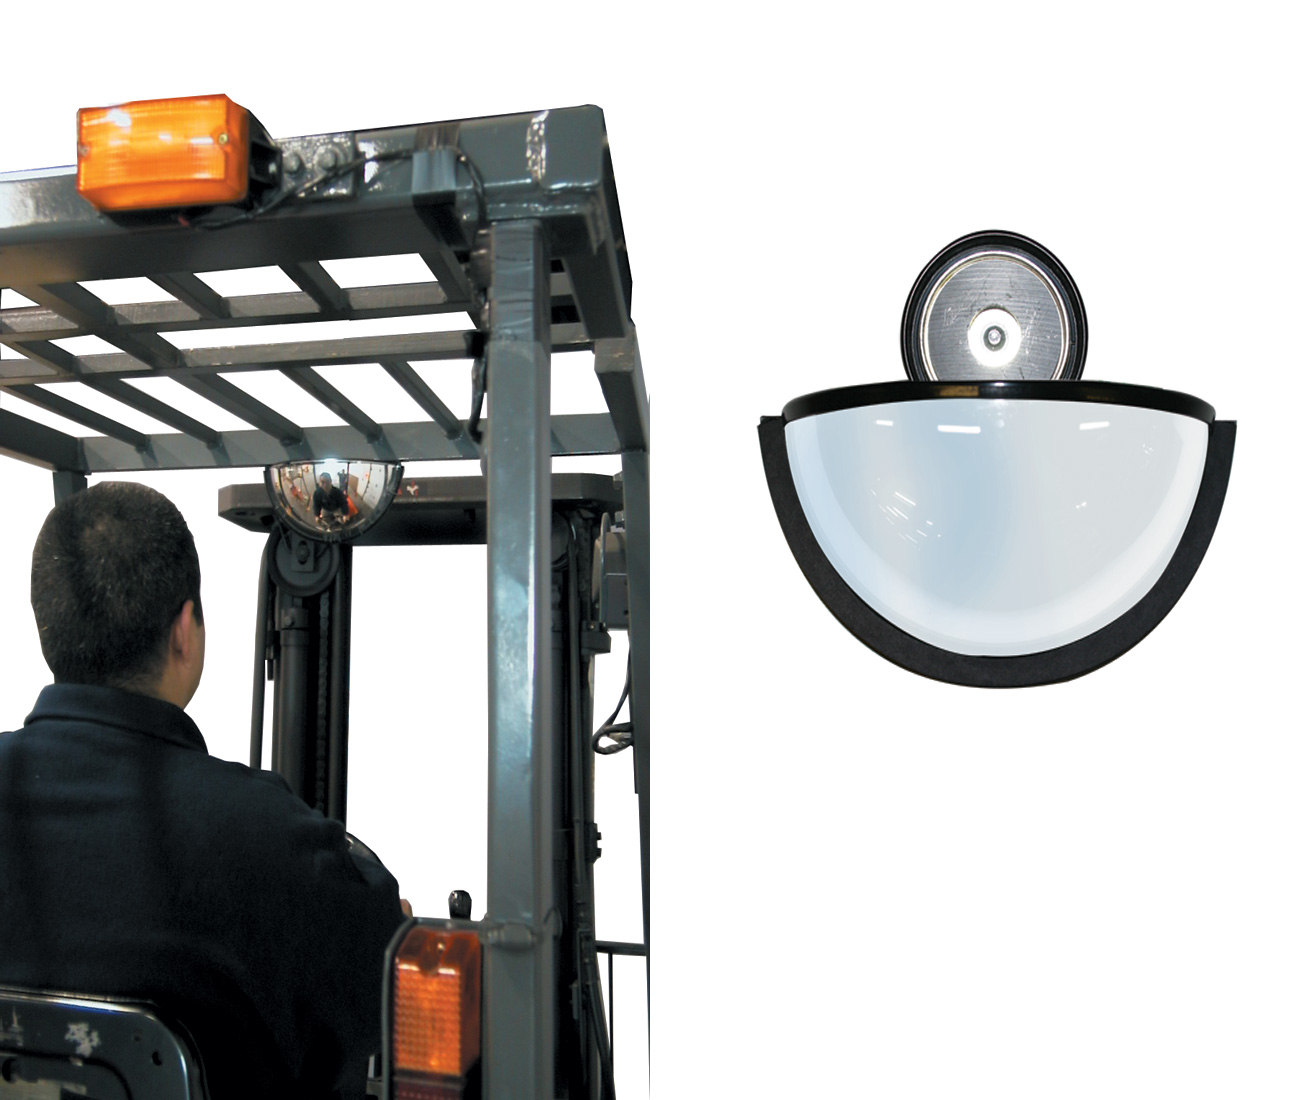 Forklift Rear View Mirror Our Anti Blind Spot Mirror Greatly Improves Visibility